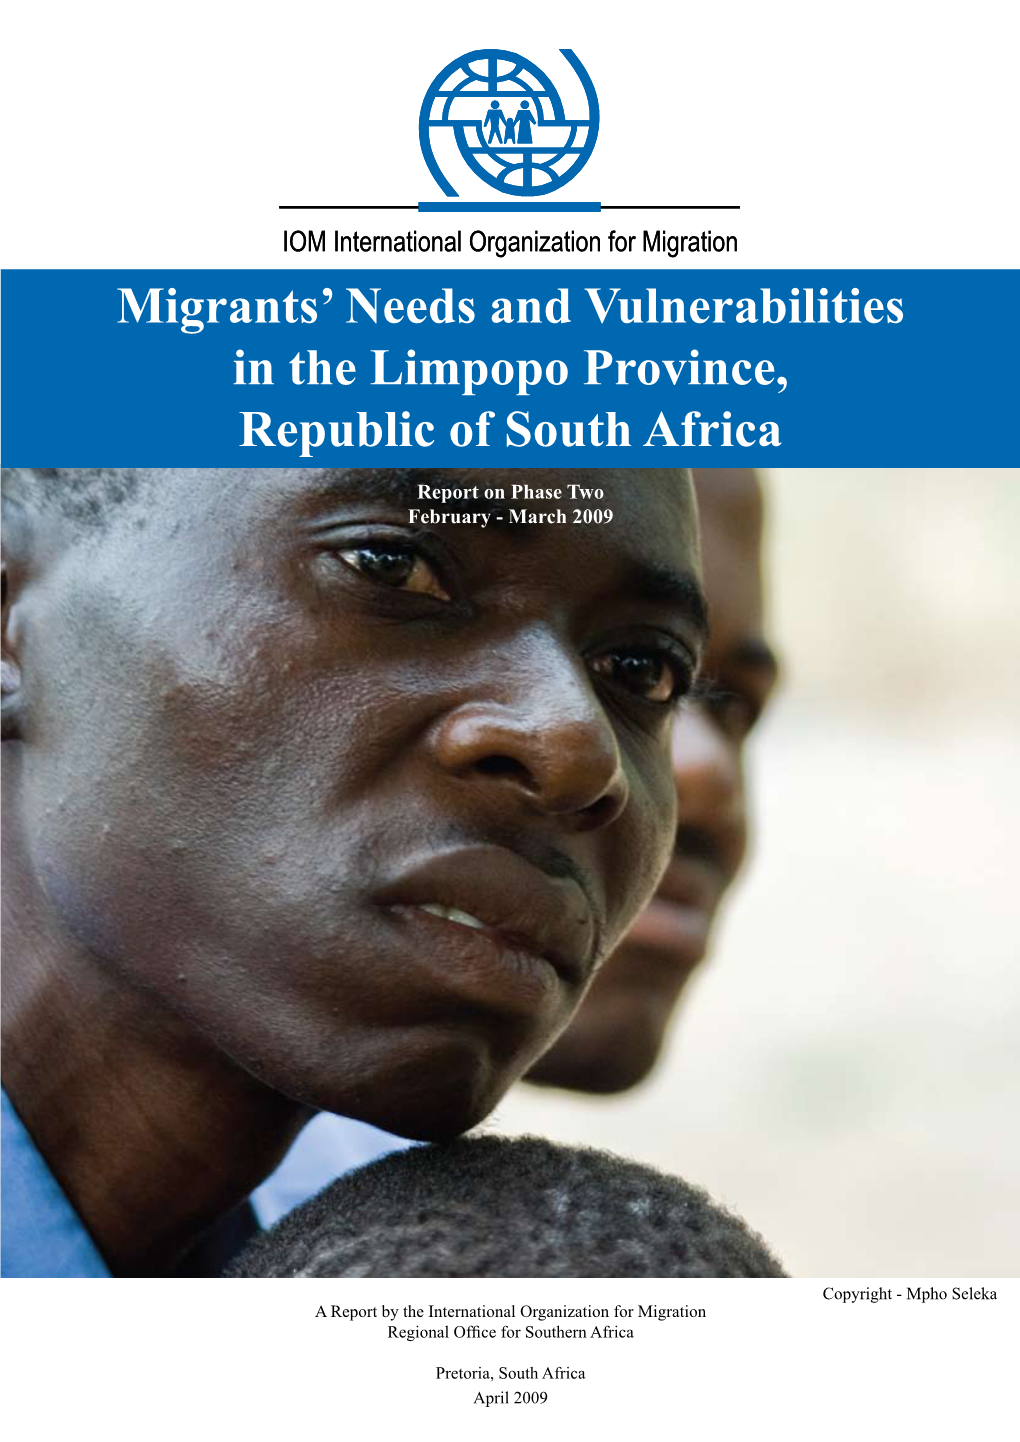 Migrants' Needs and Vulnerabilities in the Limpopo Province, Republic Of